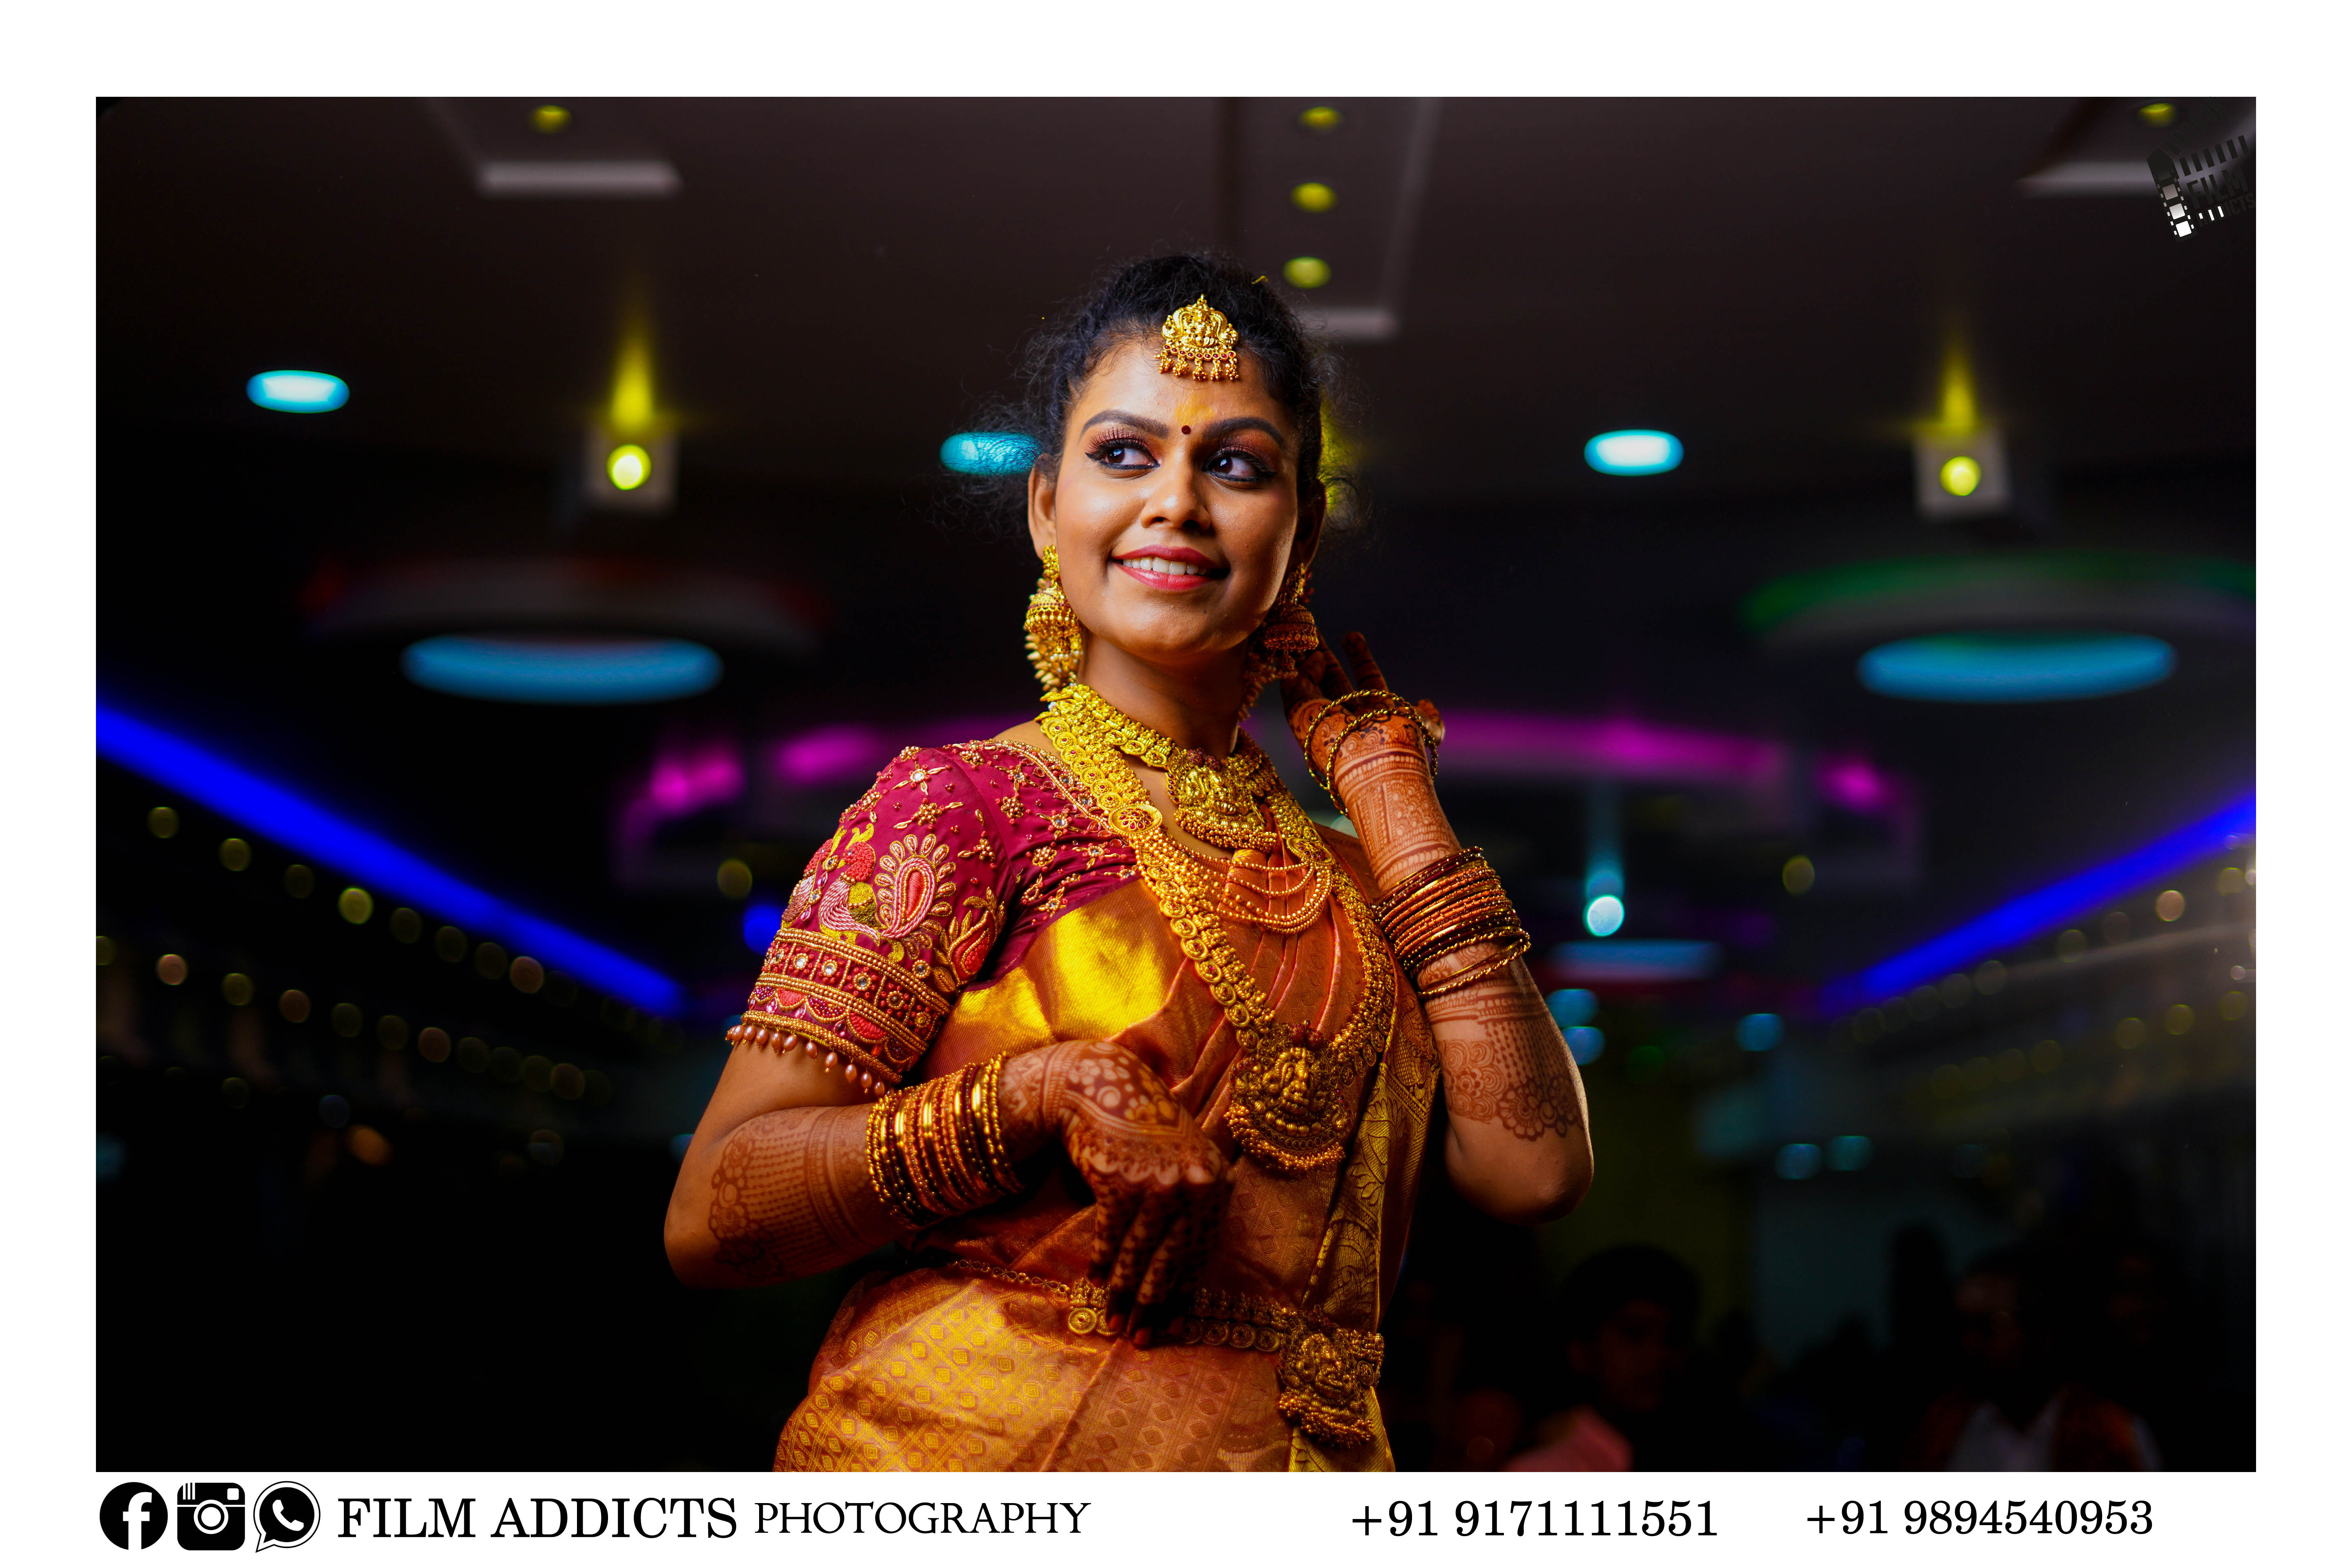 Best Puberty Photography in Trichy-FilmAddicts Photography,Best wedding photographers in Trichy,Best wedding photography in Trichy,Best candid photographers in Trichy,Best candid photography in Trichy,Best marriage photographers in Trichy,Best marriage photography in Trichy,Best photographers in Trichy,Best photography in Trichy,Best wedding candid photography in Trichy,Best wedding candid photographers in Trichy,Best wedding video in Trichy,Best wedding videographers in Trichy,Best wedding videography in Trichy,Best candid videographers in Trichy,Best candid videography in Trichy,Best marriage videographers in Trichy,Best marriage videography in Trichy,Best videographers in Trichy,Best videography in Trichy,Best wedding candid videography in Trichy,Best wedding candid videographers in Trichy,Best helicam operators in Trichy,Best drone operators in Trichy,Best wedding studio in Trichy,Best professional photographers in Trichy,Best professional photography in Trichy,No.1 wedding photographers in Trichy,No.1 wedding photography in Trichy,Trichy wedding photographers,Trichy wedding photography,Trichy wedding videos,Best candid videos in Trichy,Best candid photos in Trichy,Best helicam operators photography in Trichy,Best helicam operator photographers in Trichy,Best outdoor videography in Trichy,Best professional wedding photography in Trichy,Best outdoor photography in Trichy,Best outdoor photographers in Trichy,Best drone operators photographers in Trichy,Best wedding candid videography in Trichy,tamilnadu wedding photography, tamilnadu.